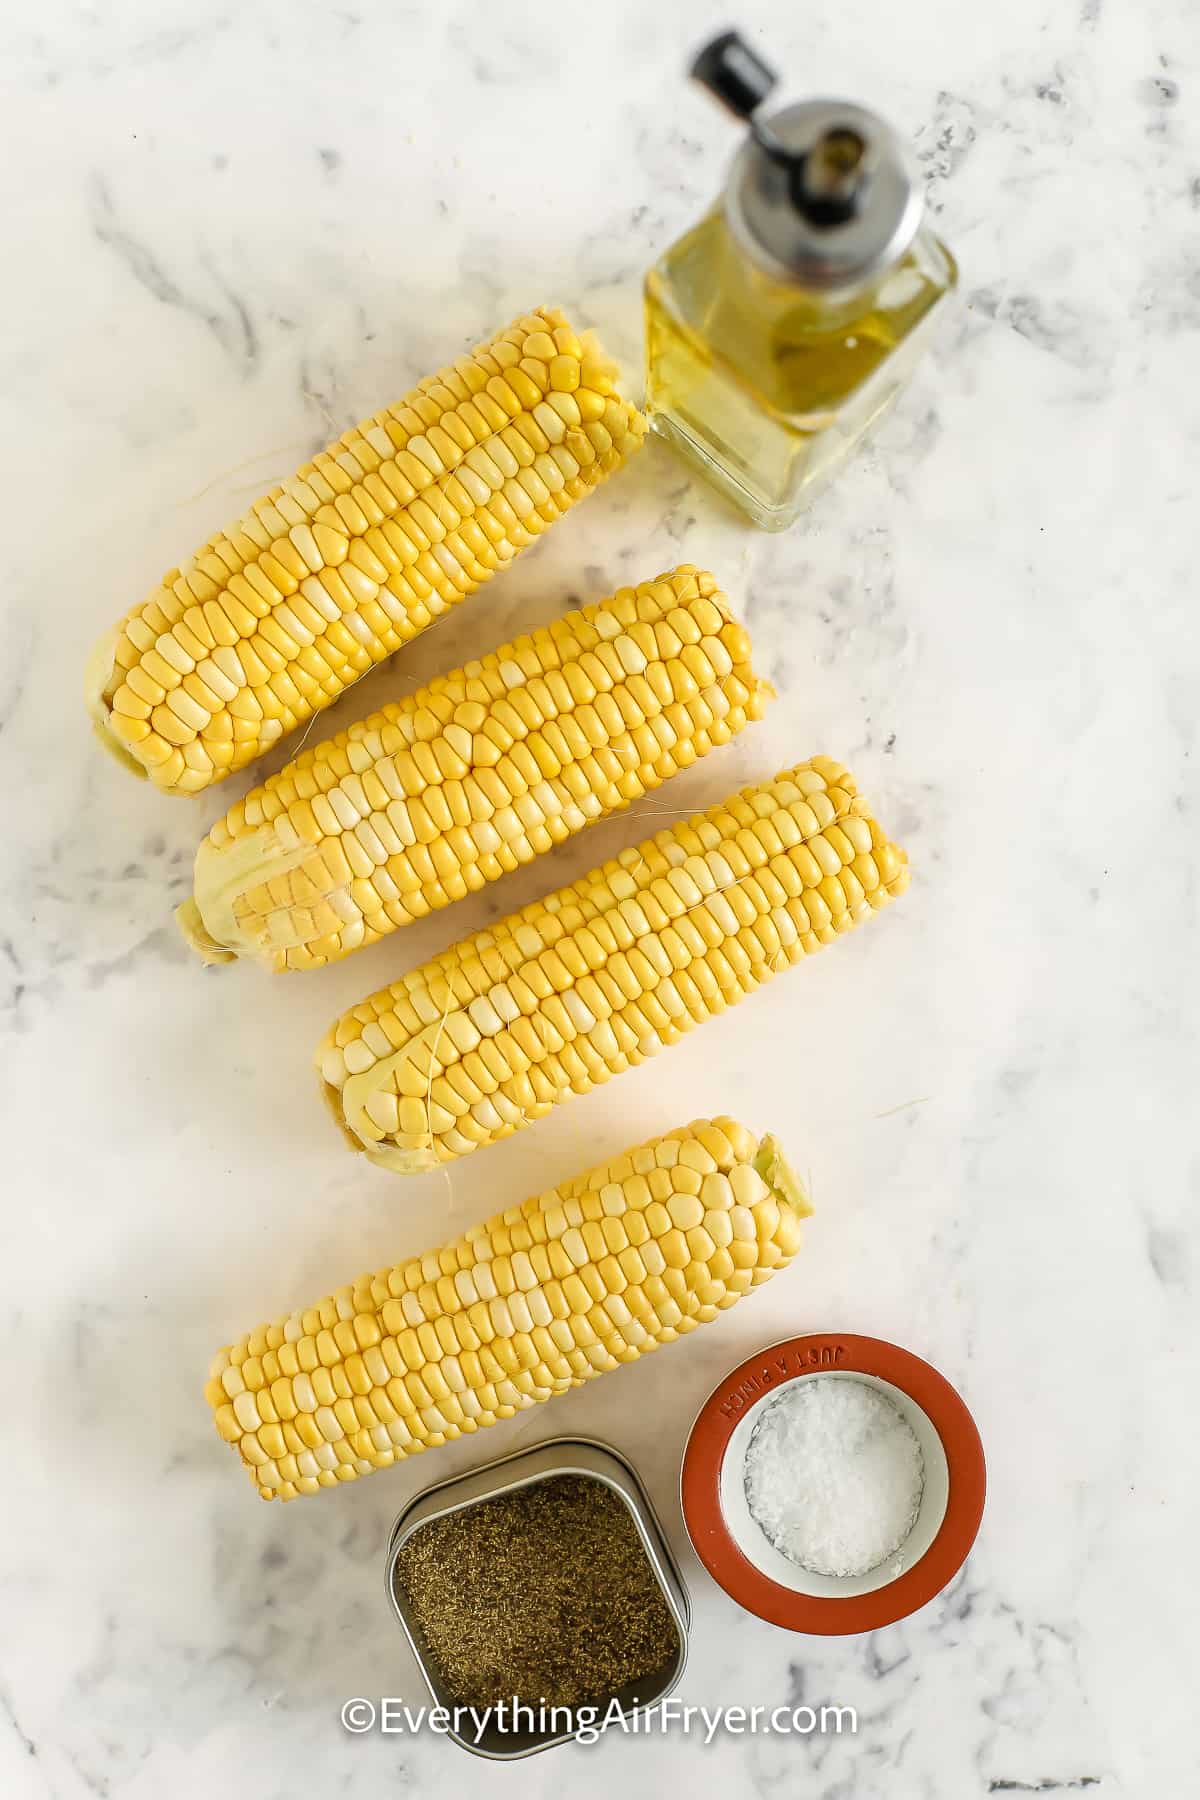 ingredients assembled to make air fryer corn on the cob